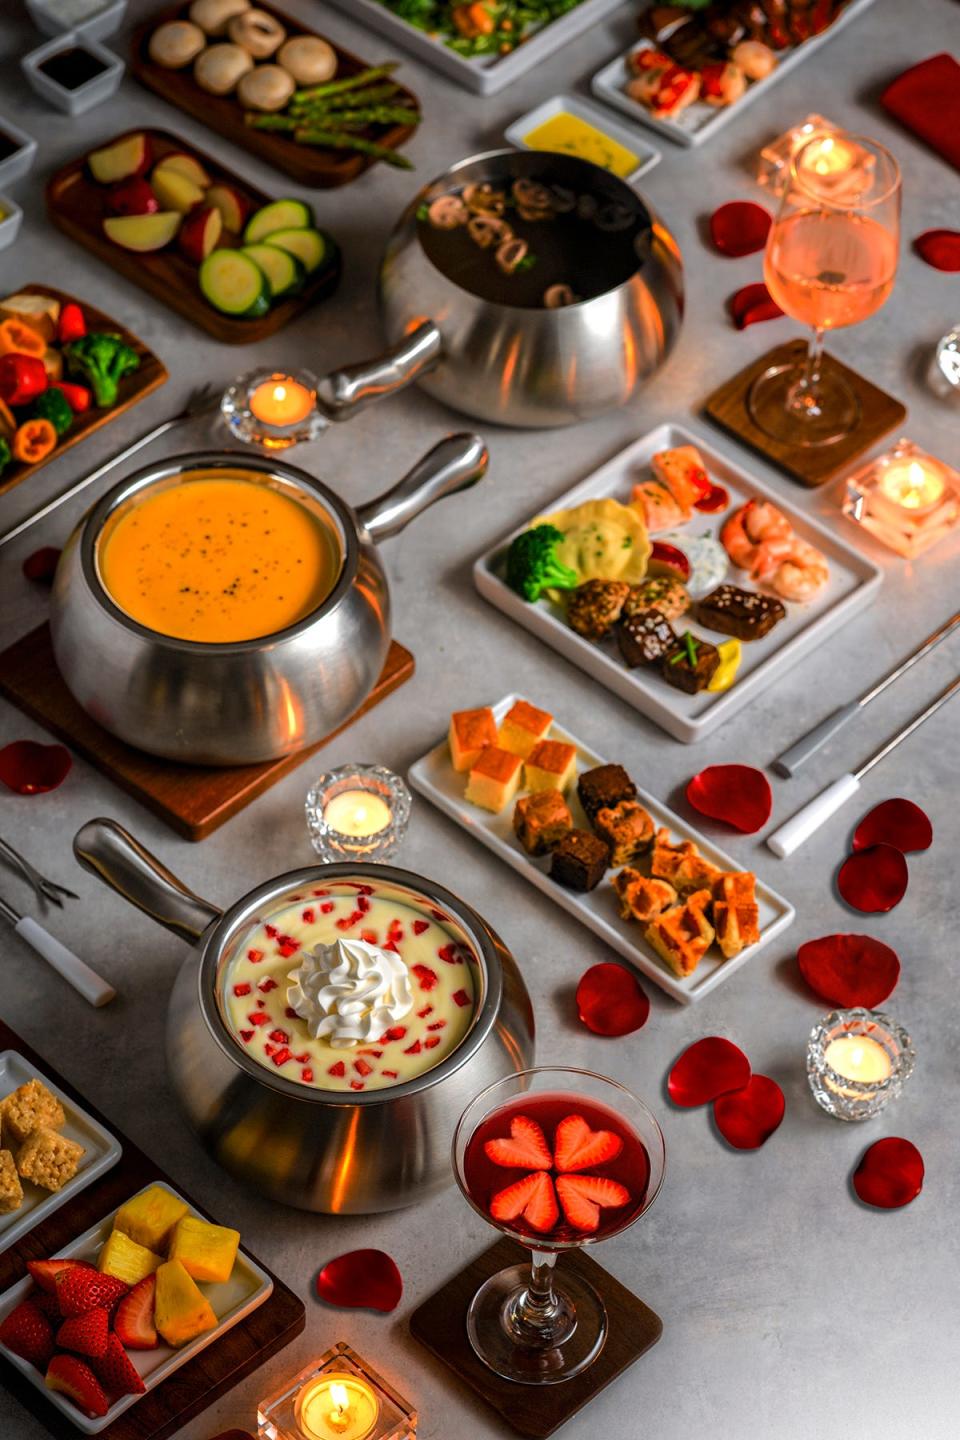 The Melting Pot offers different types of fondue courses.